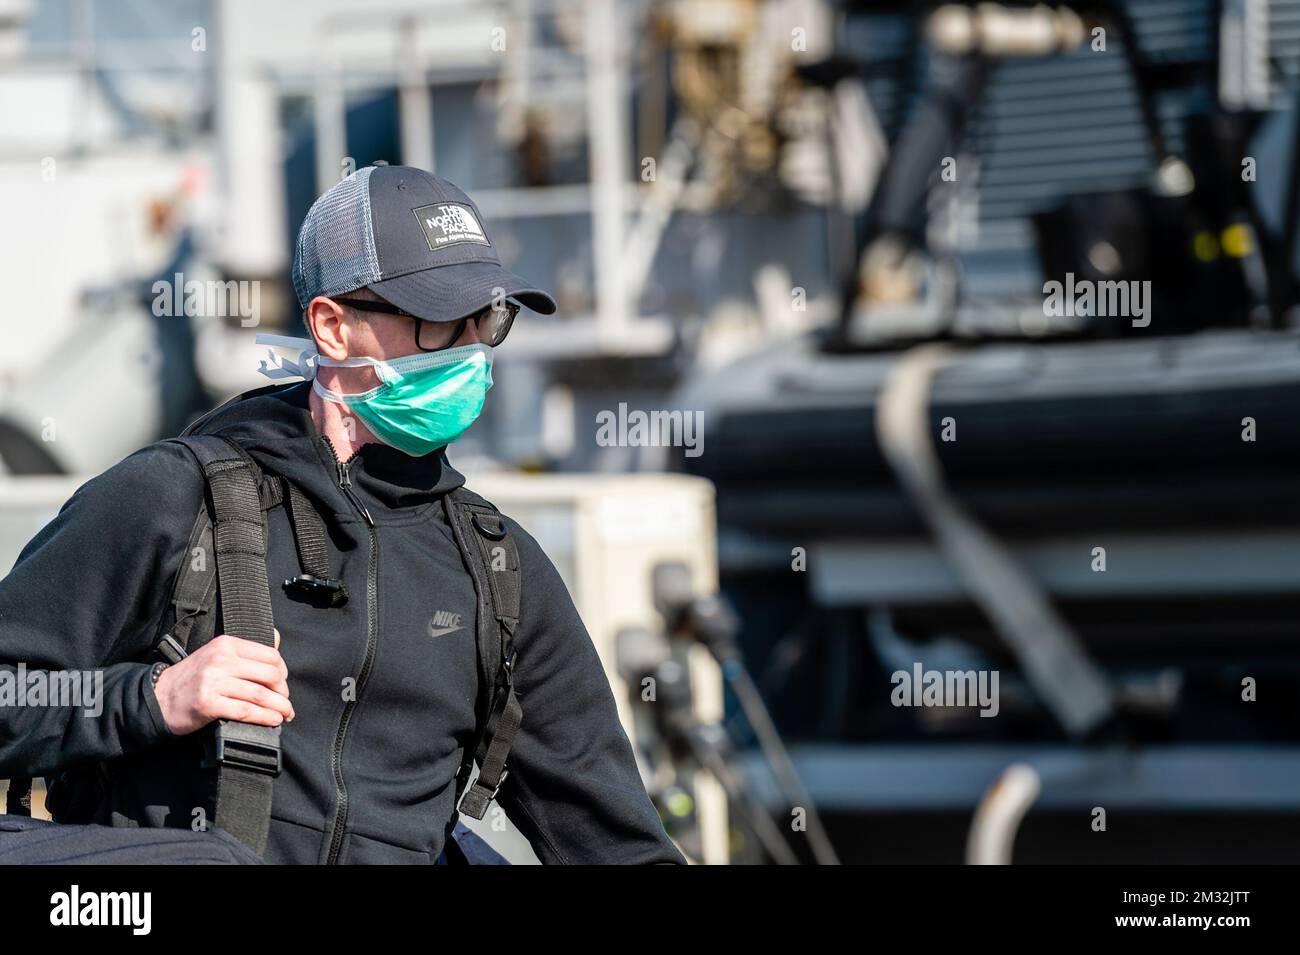 ATTENTION EDITORS - HAND OUT PICTURES - EDITORIAL USE ONLY - MANDATORY CREDIT HANDOUT DEFENSIE - DEFENCE TBN JORN URBAIN a person wearing a mouth mask pictured at the arrival of Belgian frigate Leopold 1 in Zeebrugge, Friday 27 March 2020. One of the sailors on the frigate has a confirmed Corona virus infection and has left the ship earlier. Due to the strict measures following such an infection, the ship has returned earlier from its mission and all non-infected sailors must now stay in home quarantine. BELGA PHOTO HANDOUT DEFENSIE - DEFENCE TBN JORN URBAIN  Stock Photo